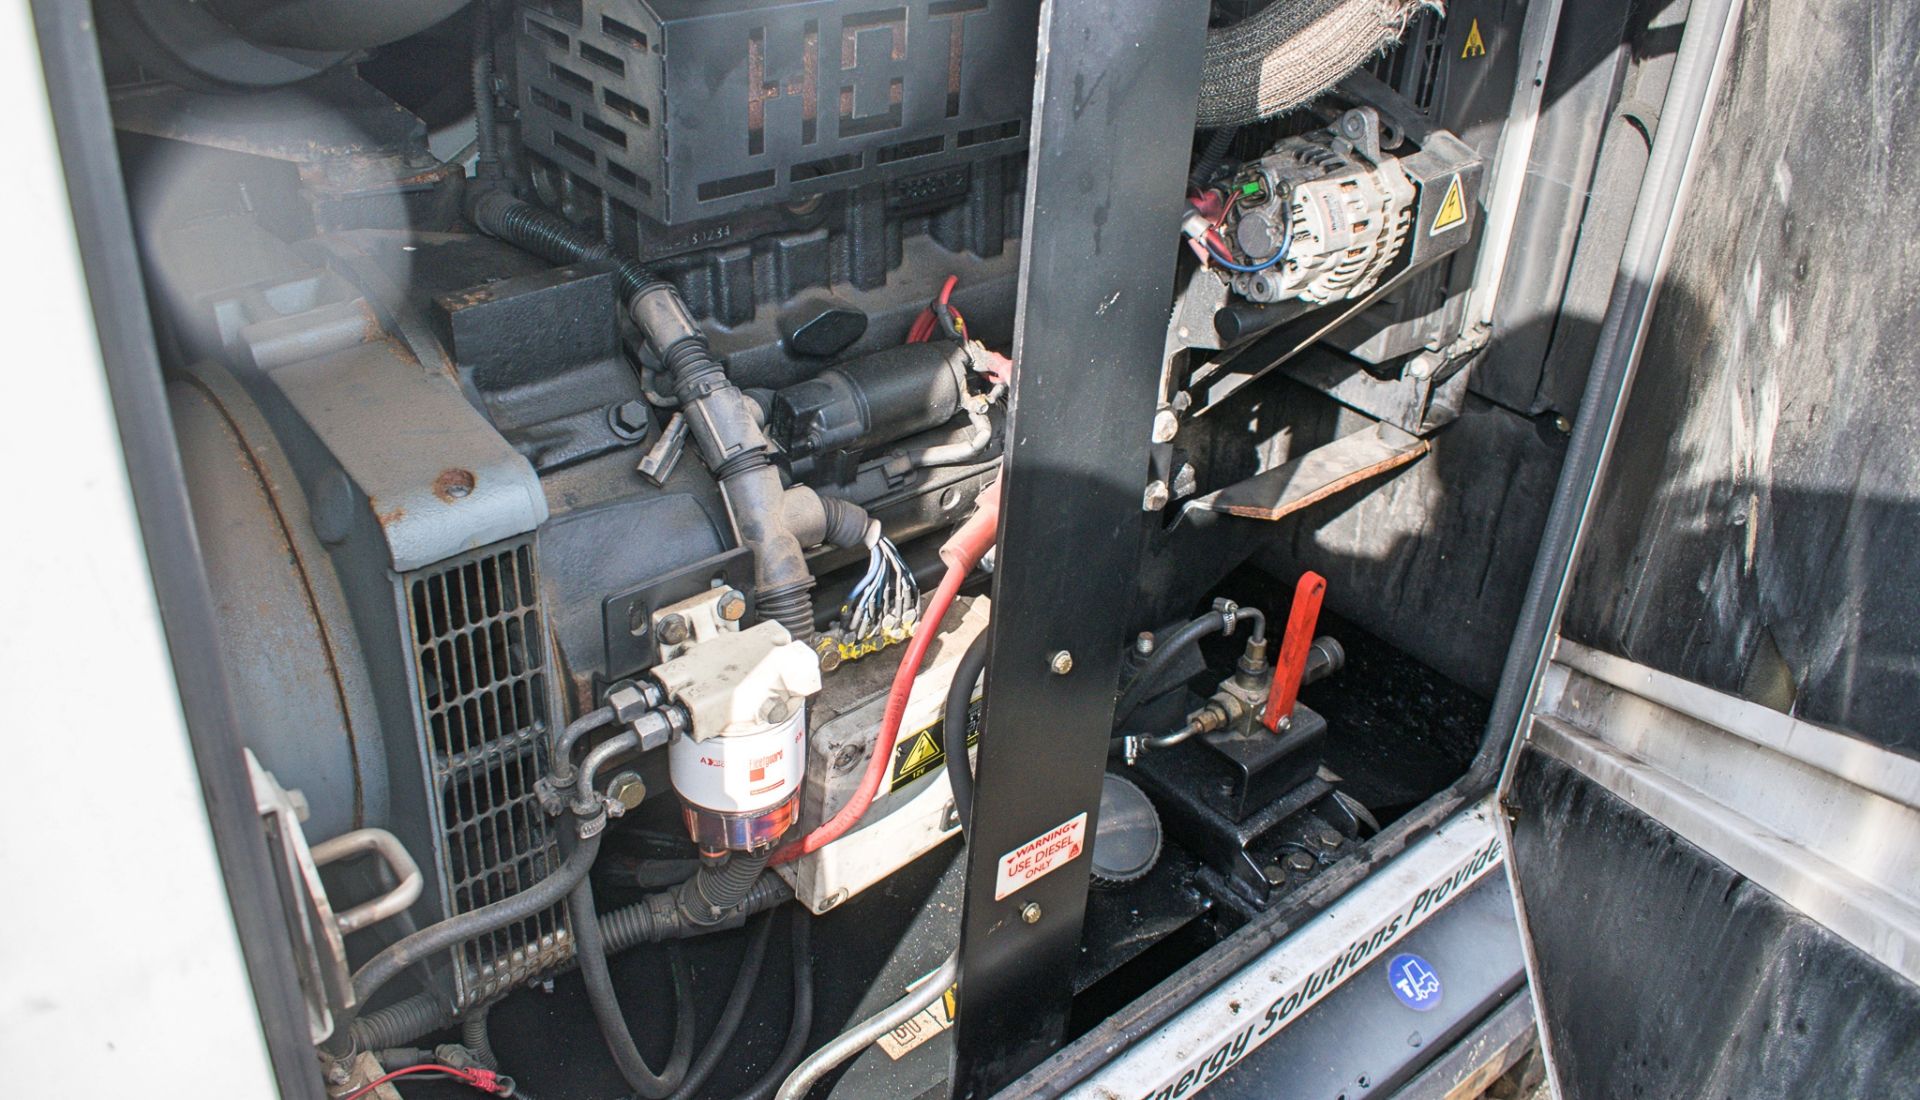 SDMO R33 33 kva diesel driven generator Year: 2012 S/N: 312007927 Recorded Hours: 27,411 A583127 - Image 6 of 7